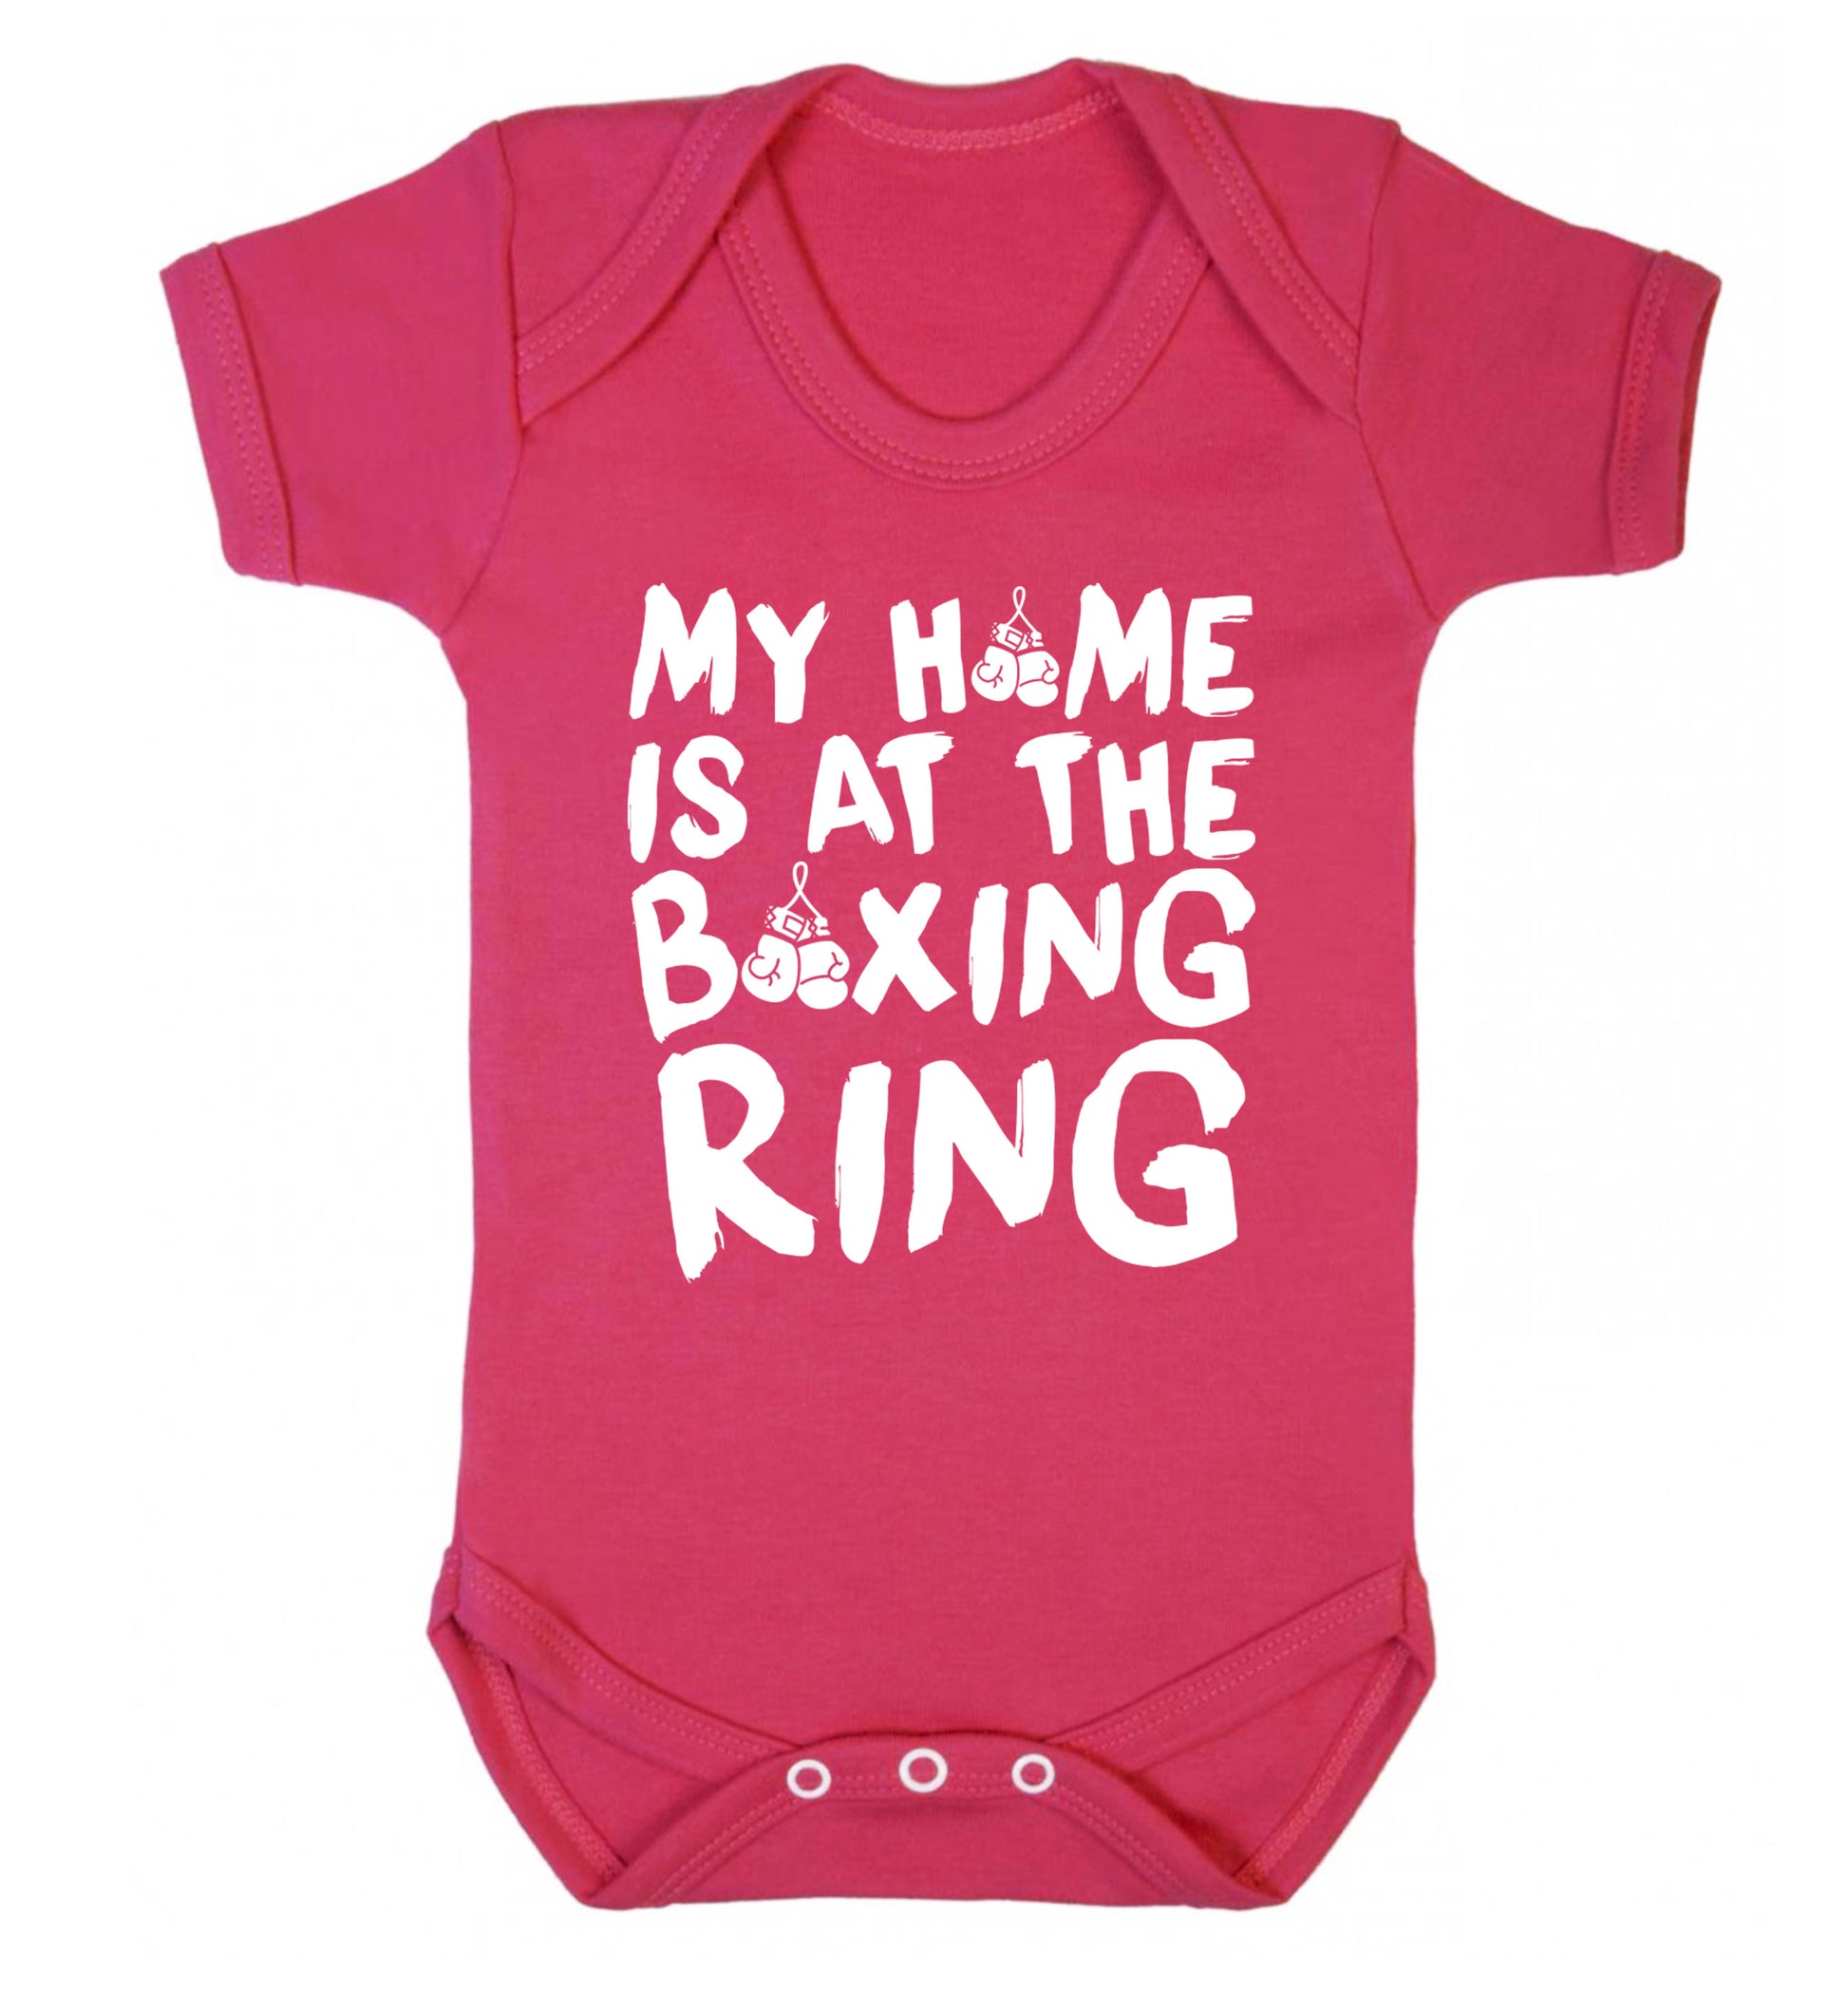 My home is at the boxing ring Baby Vest dark pink 18-24 months